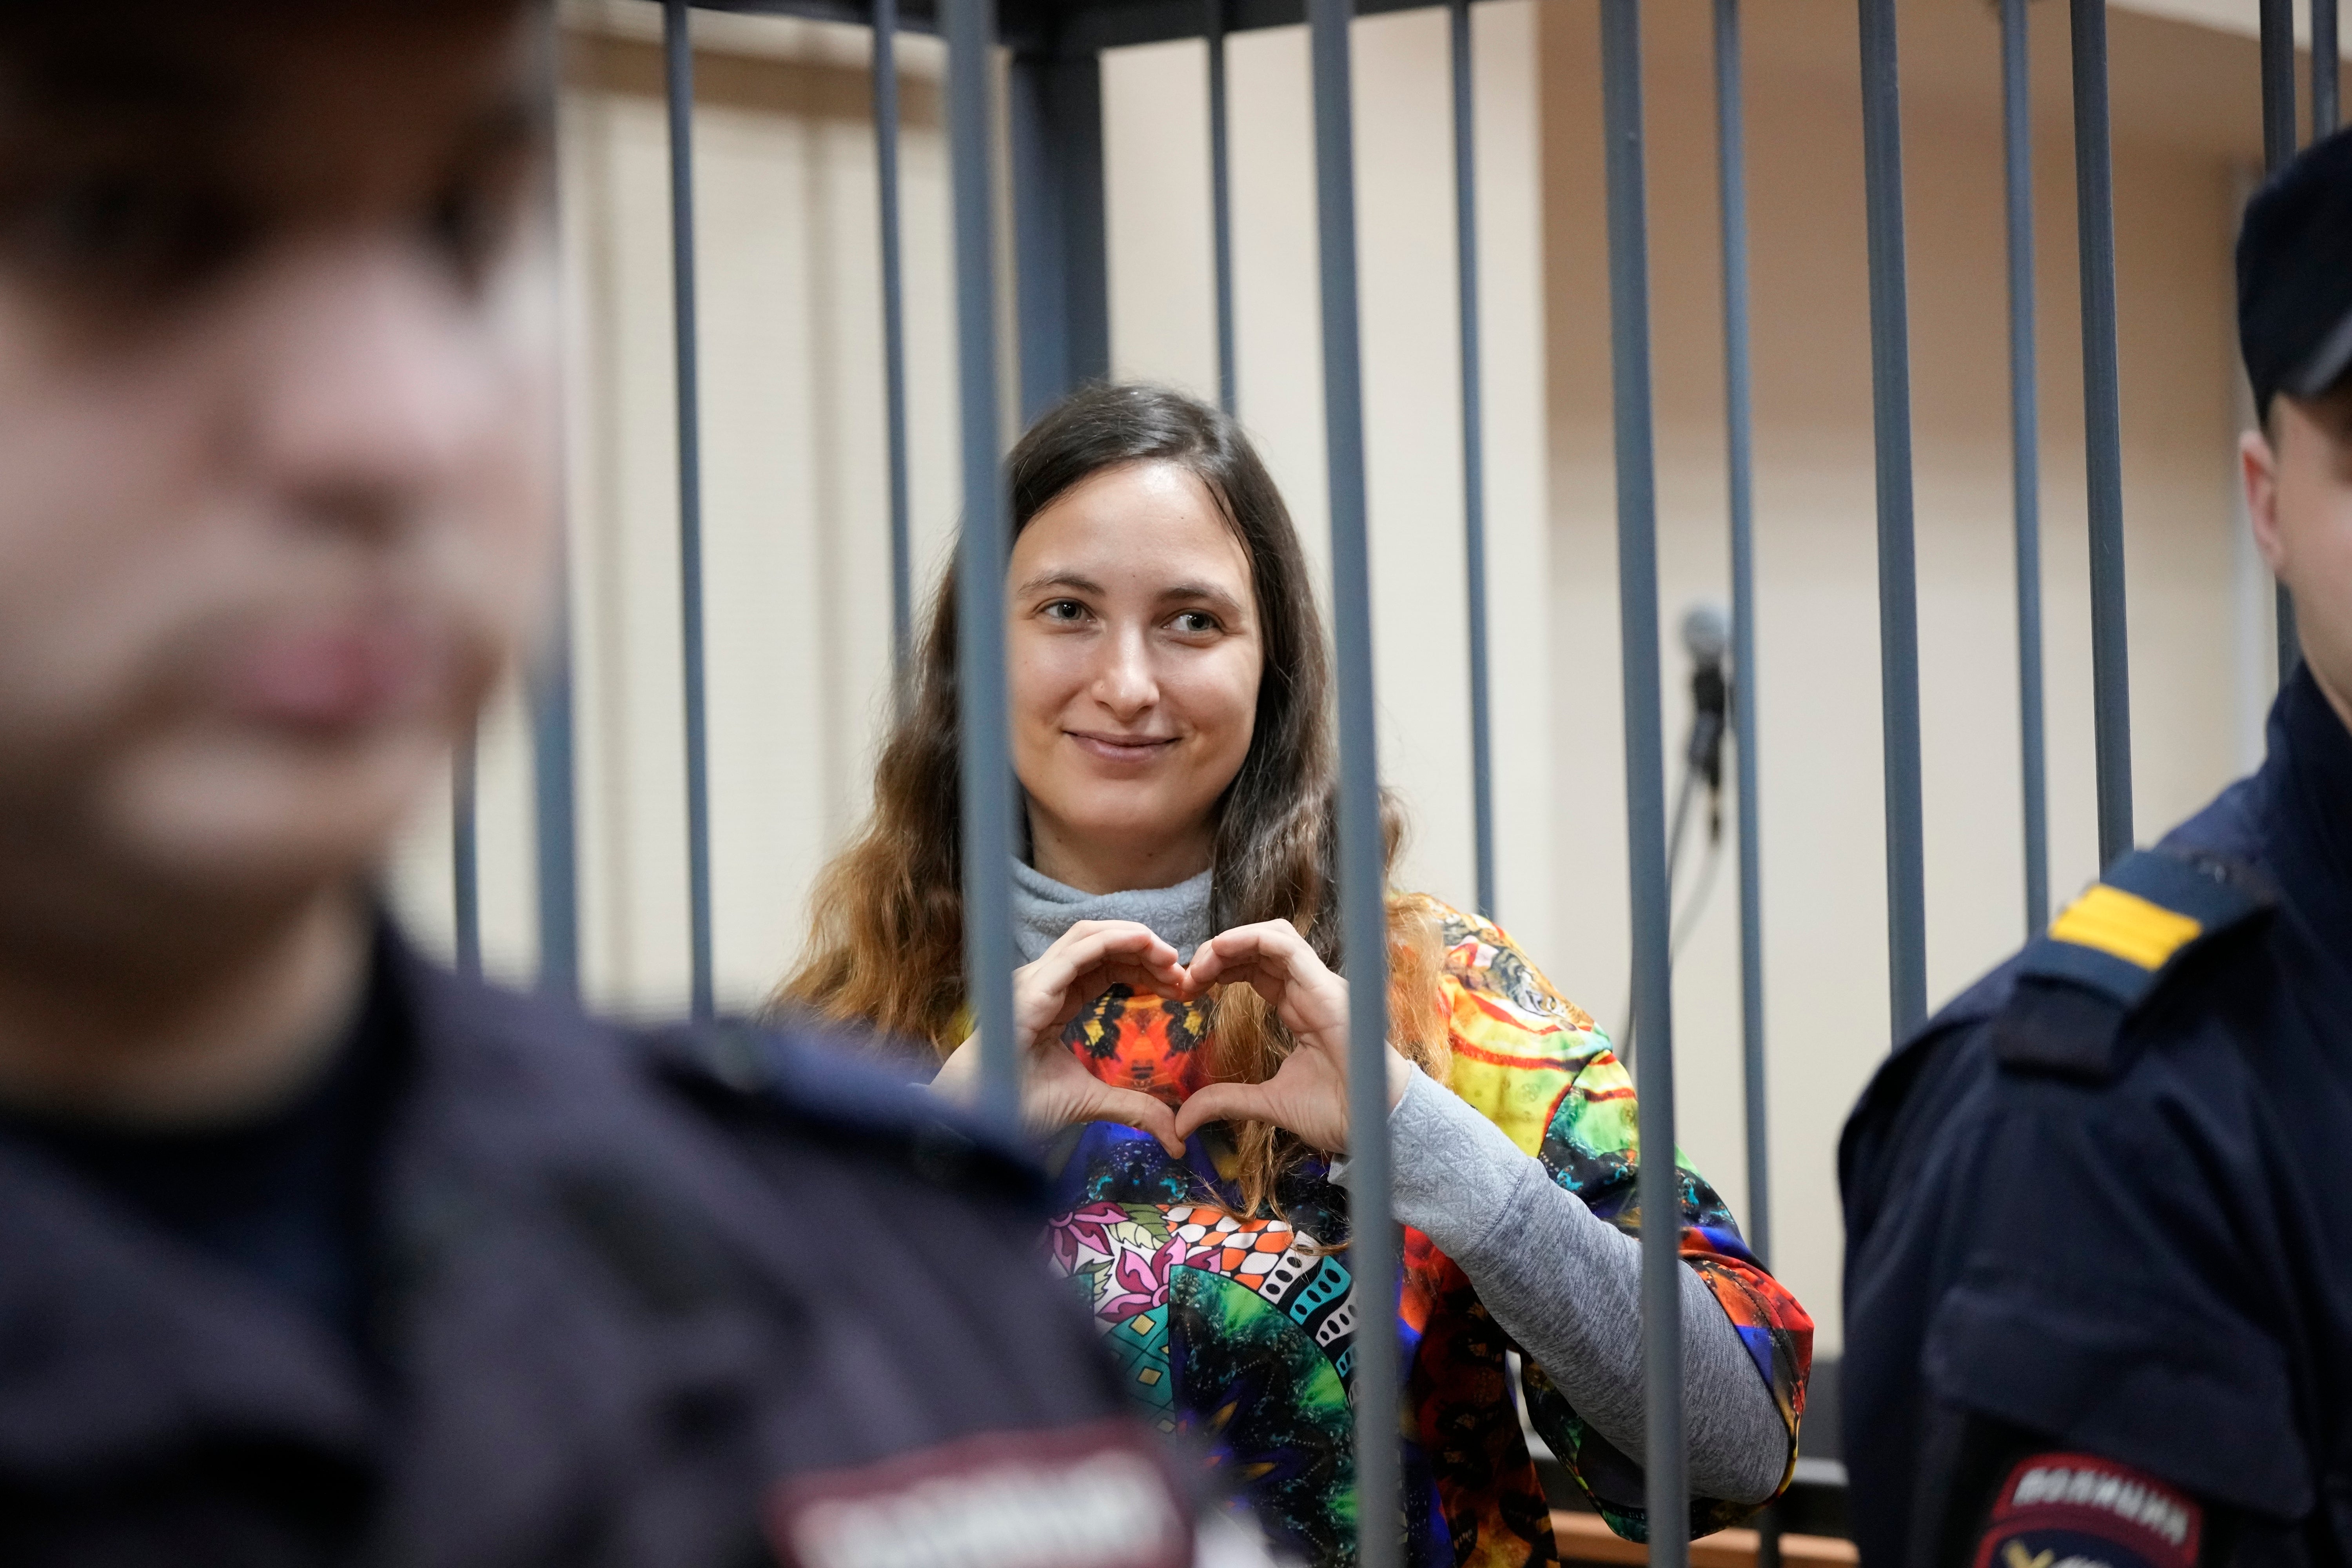 Sasha Skochilenko made the sign for love with her hands during her trial on Thursday